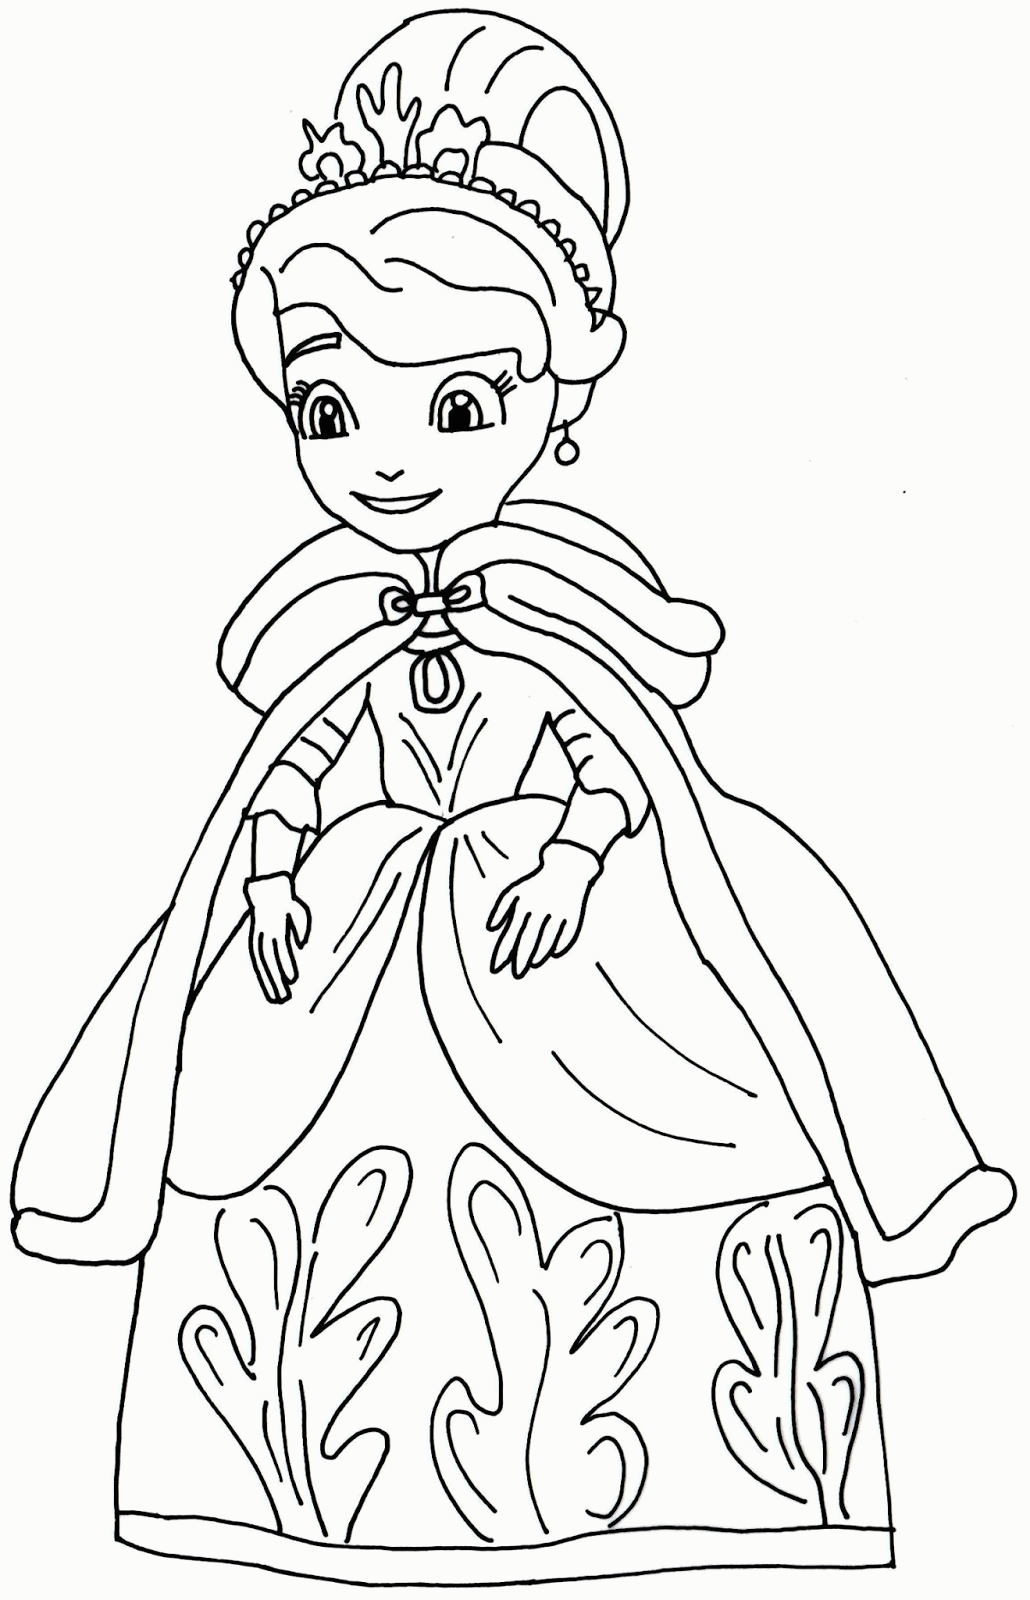 Colouring Pages Sofia The First - High Quality Coloring Pages